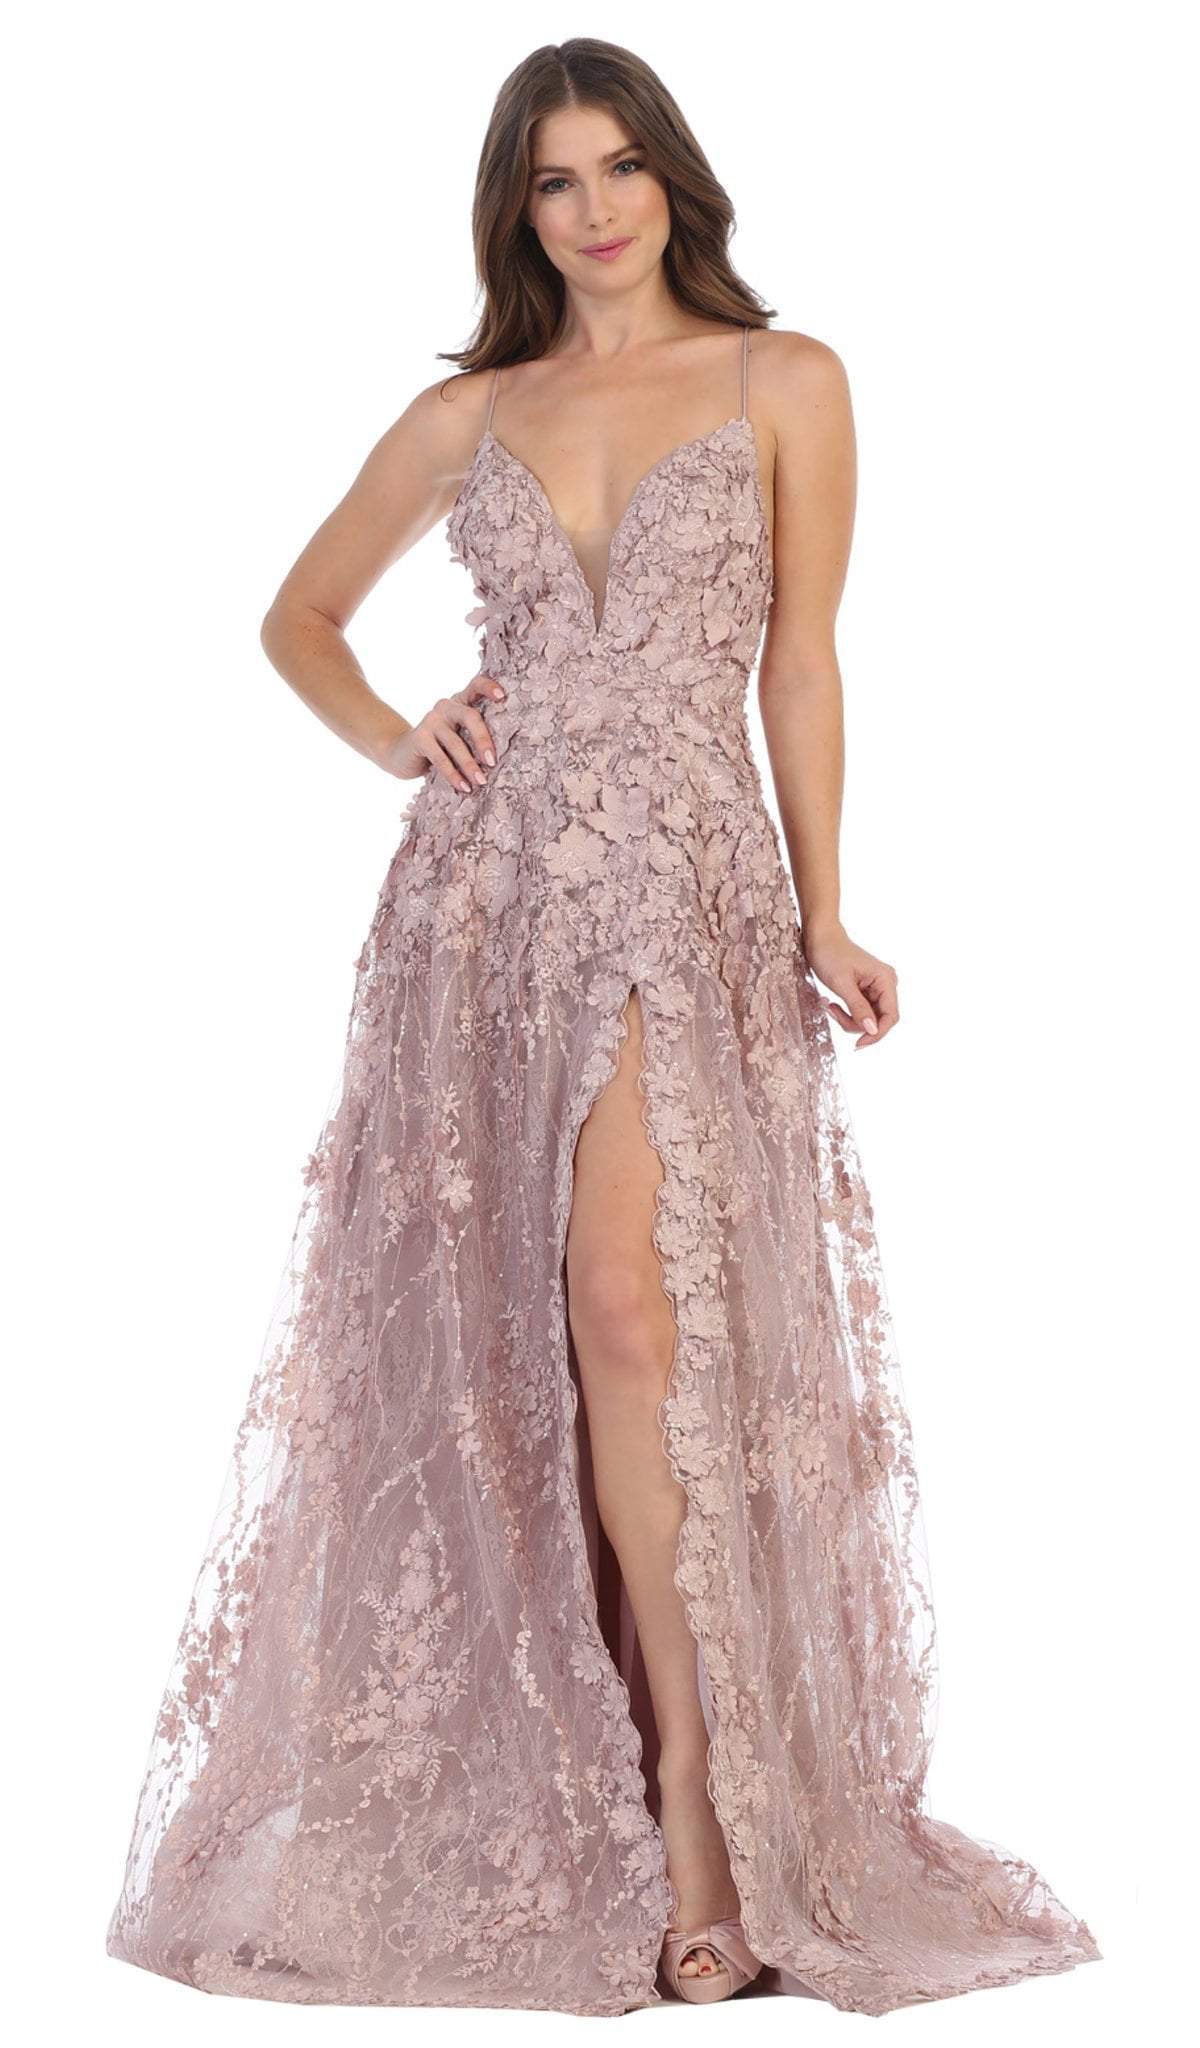 May Queen Bridal - RQ7738 Strappy Appliqued A-Line Dress with Slit Wedding Dresses 2 / Mauve